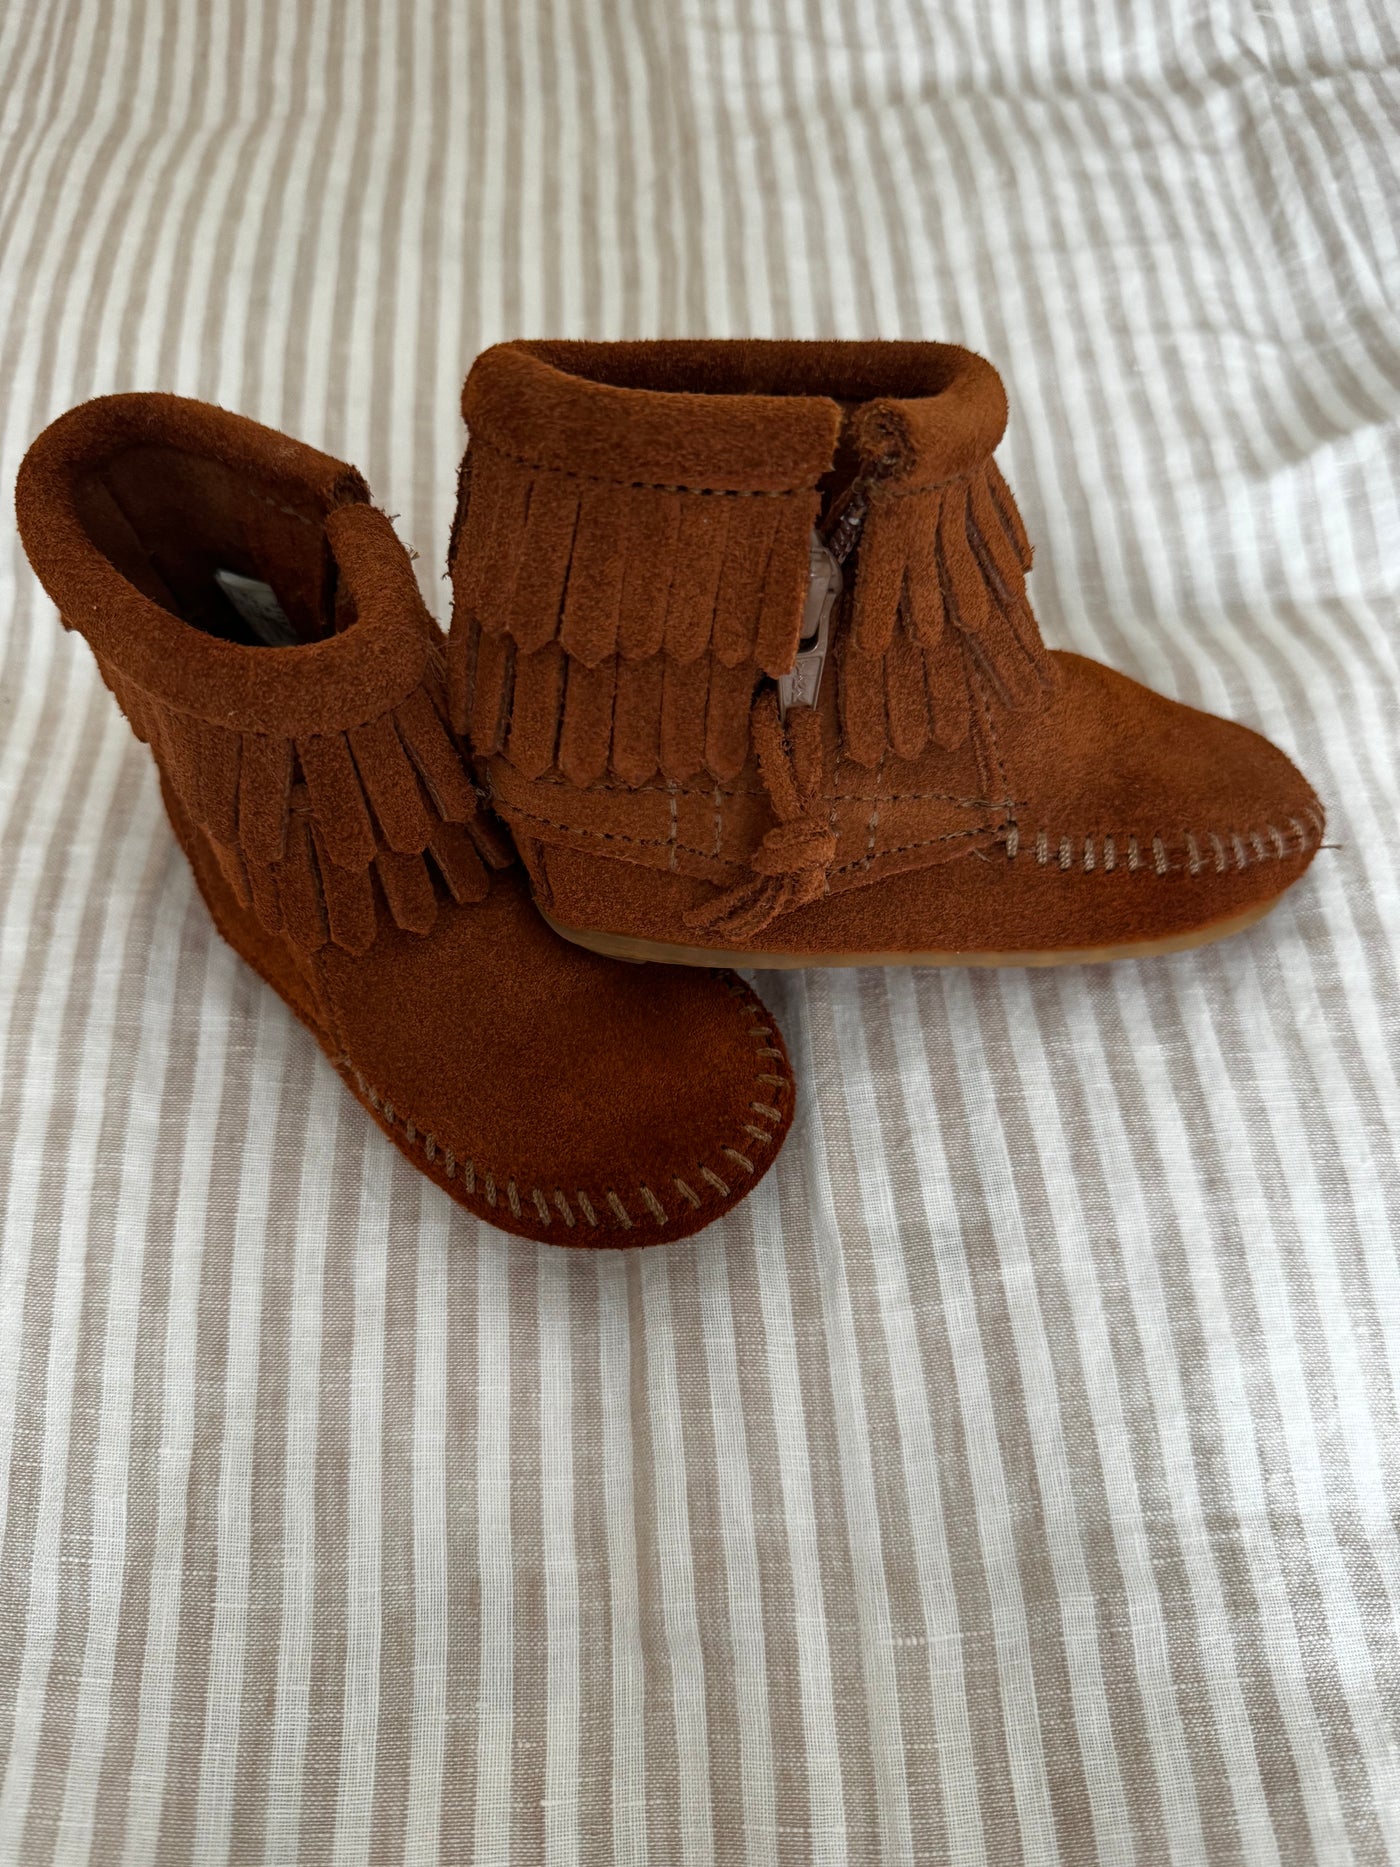 Fringe Suede Boots - Size 4